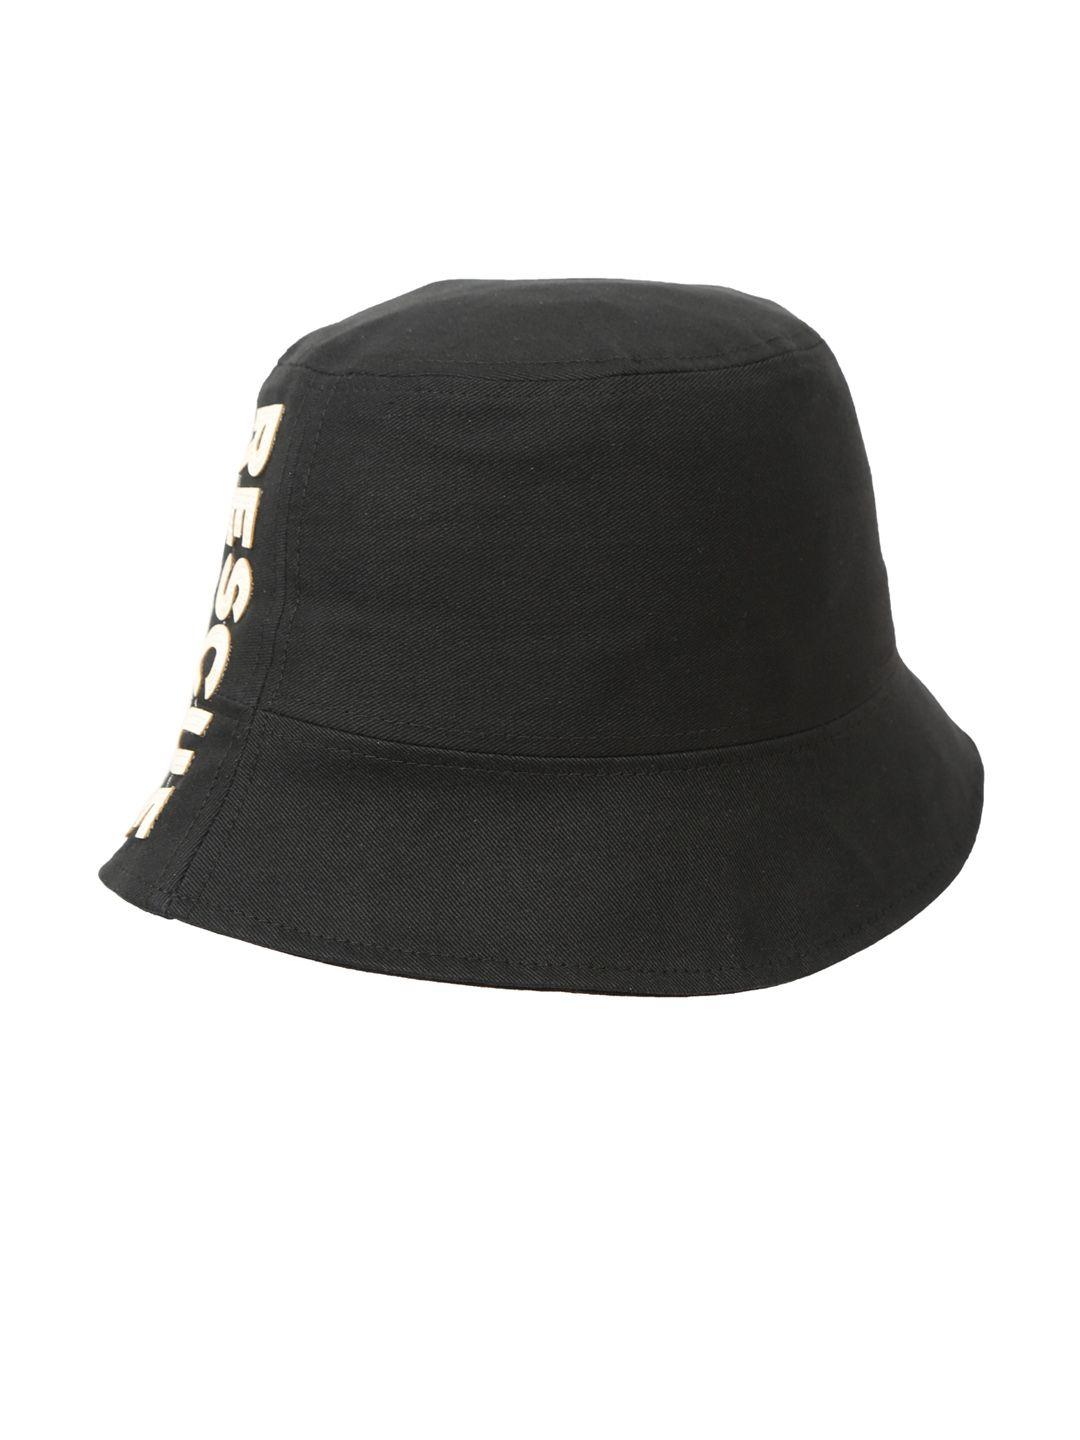 fabseasons black & white printed pure cotton bucket hat